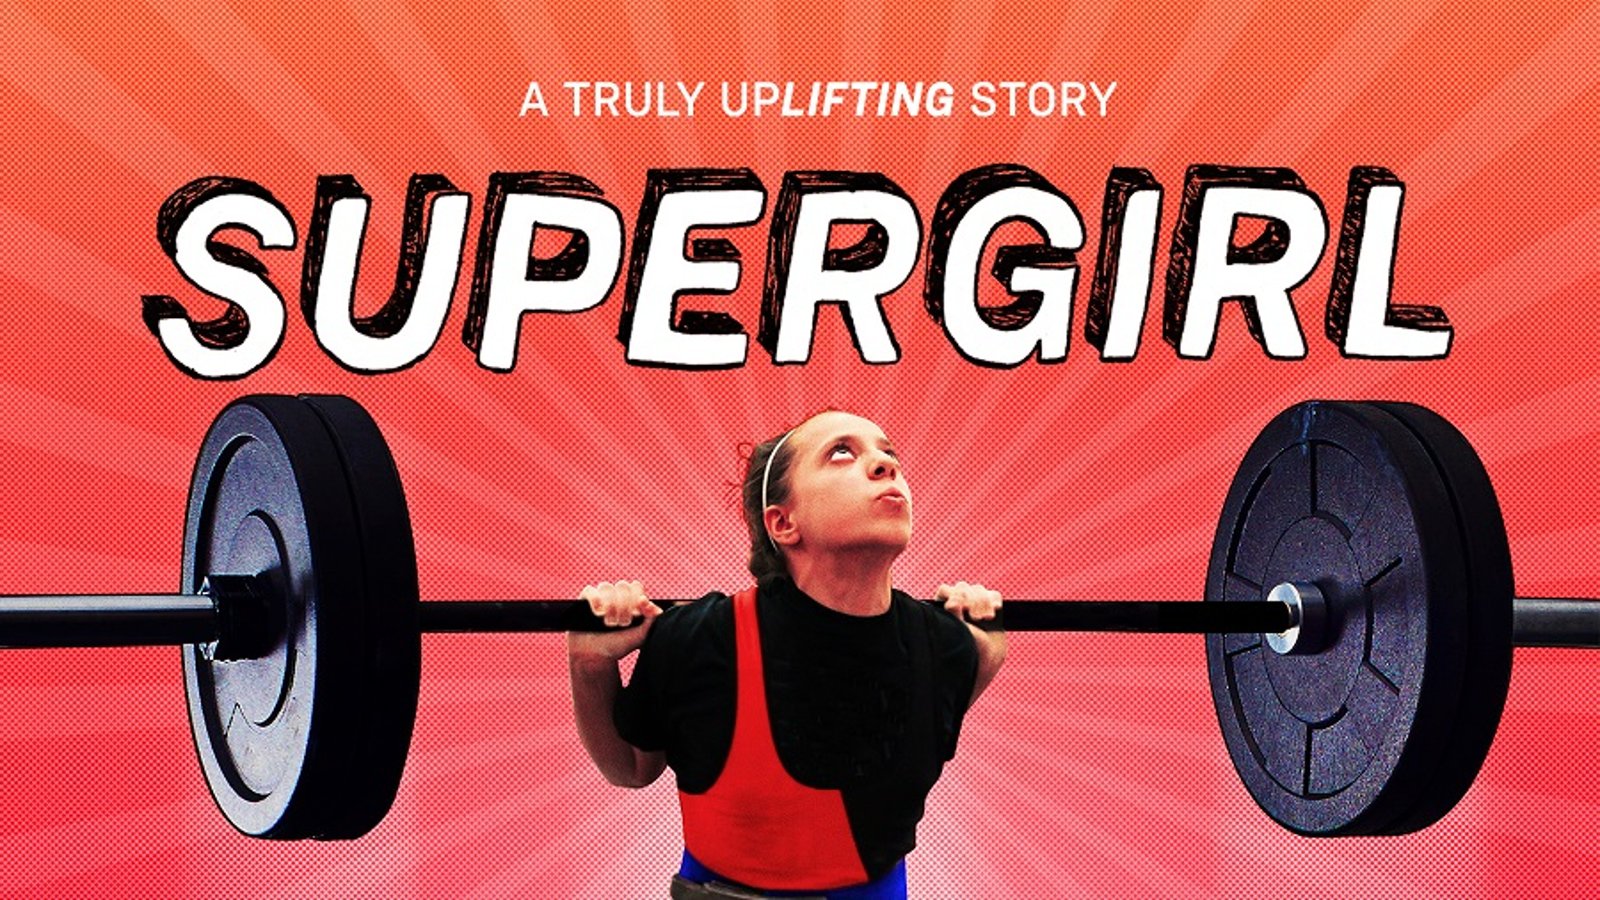 Supergirl - The Story of a Young Orthodox Jewish Weightlifter